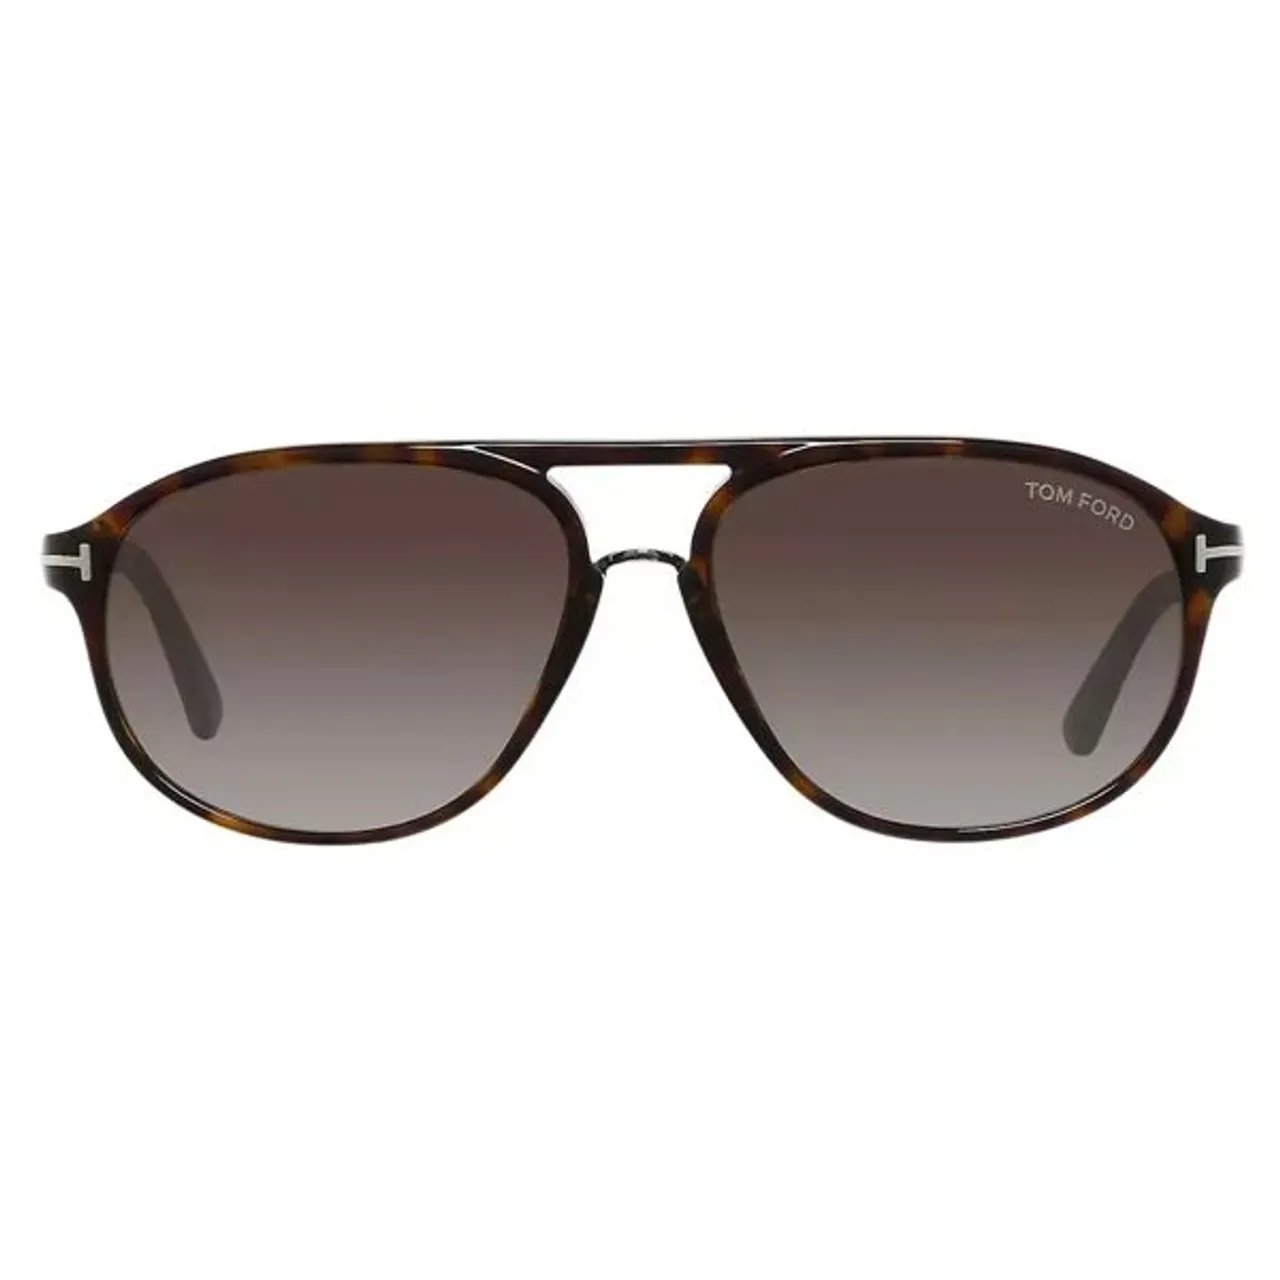 TOM FORD FT0447 Jacob Gradient Aviator Sunglasses, Brown - Brown - Male